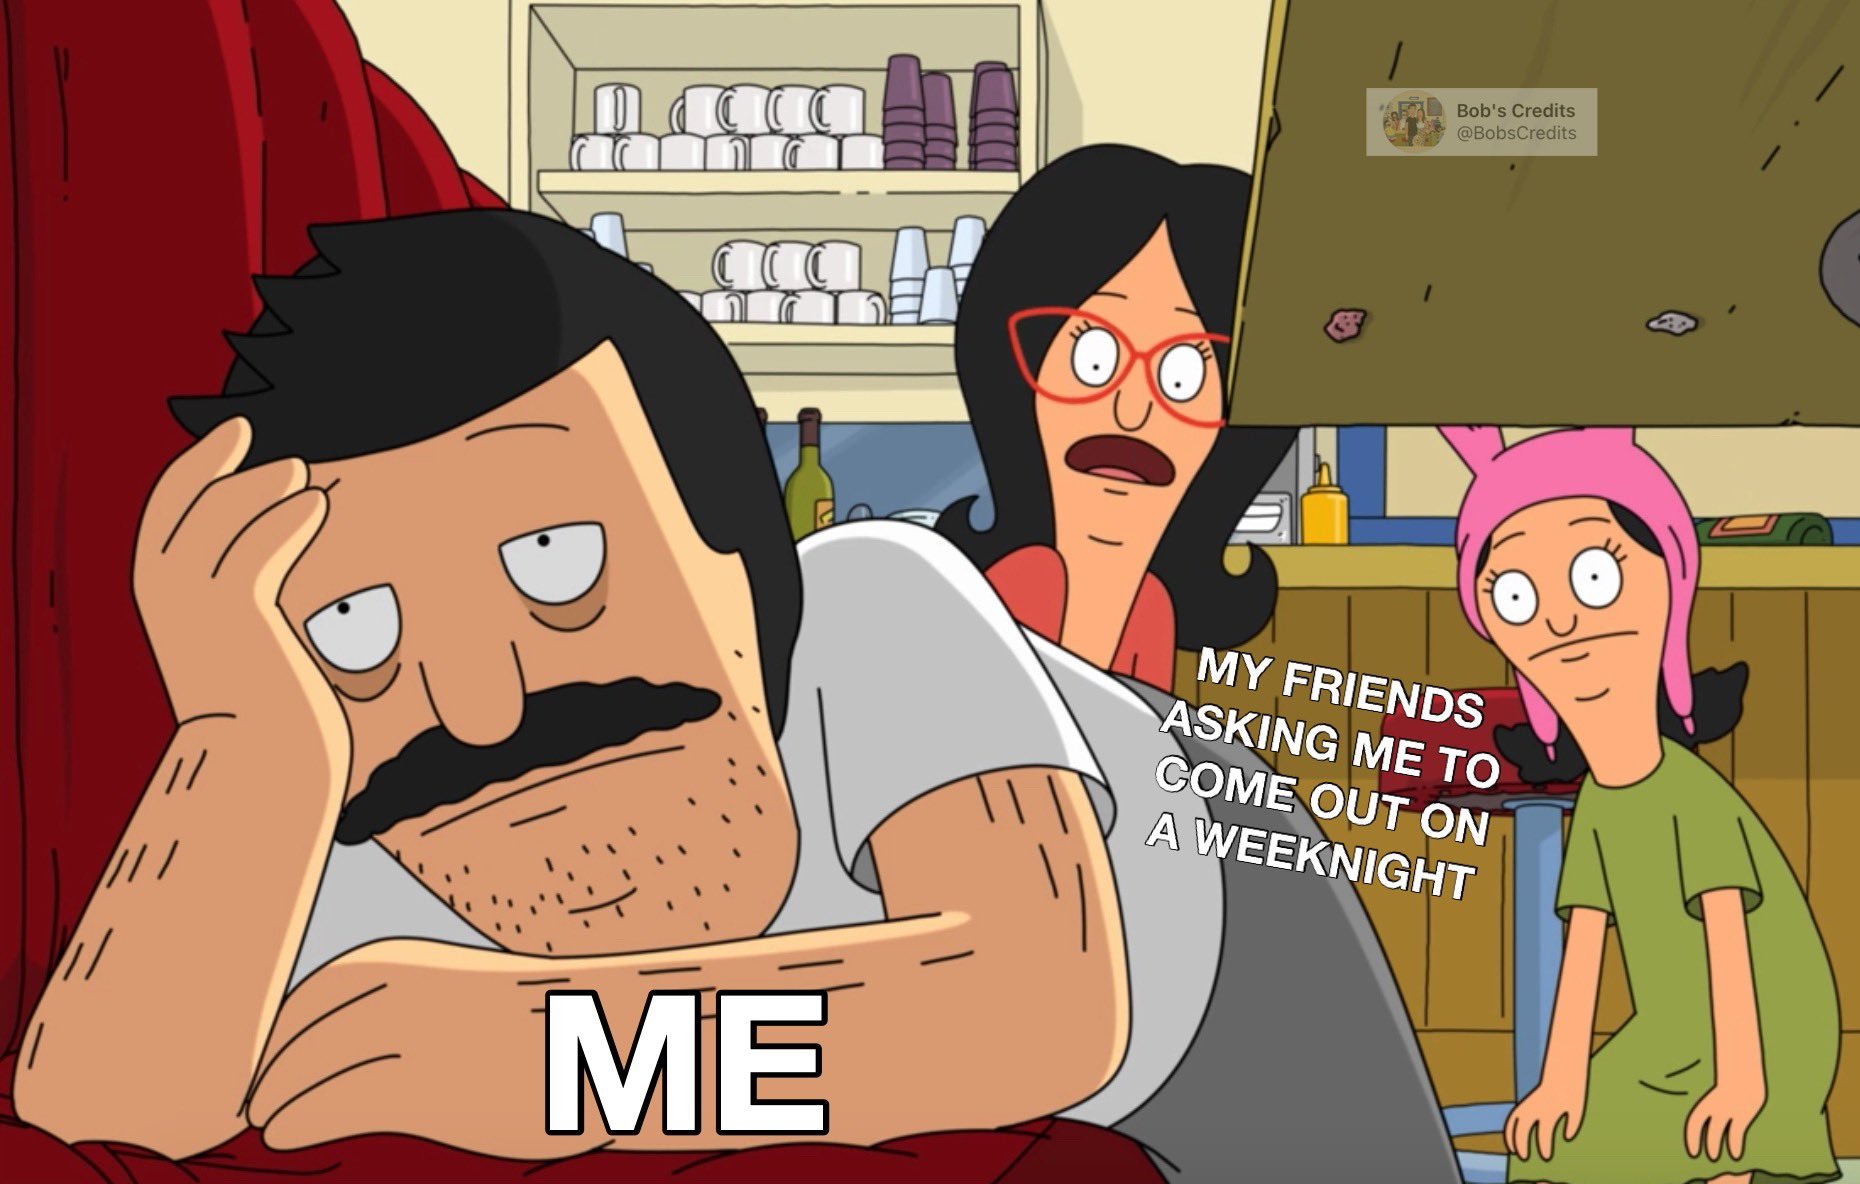 03-Best-Bobs-Burgers-Memes-Moments-going-out.JPG